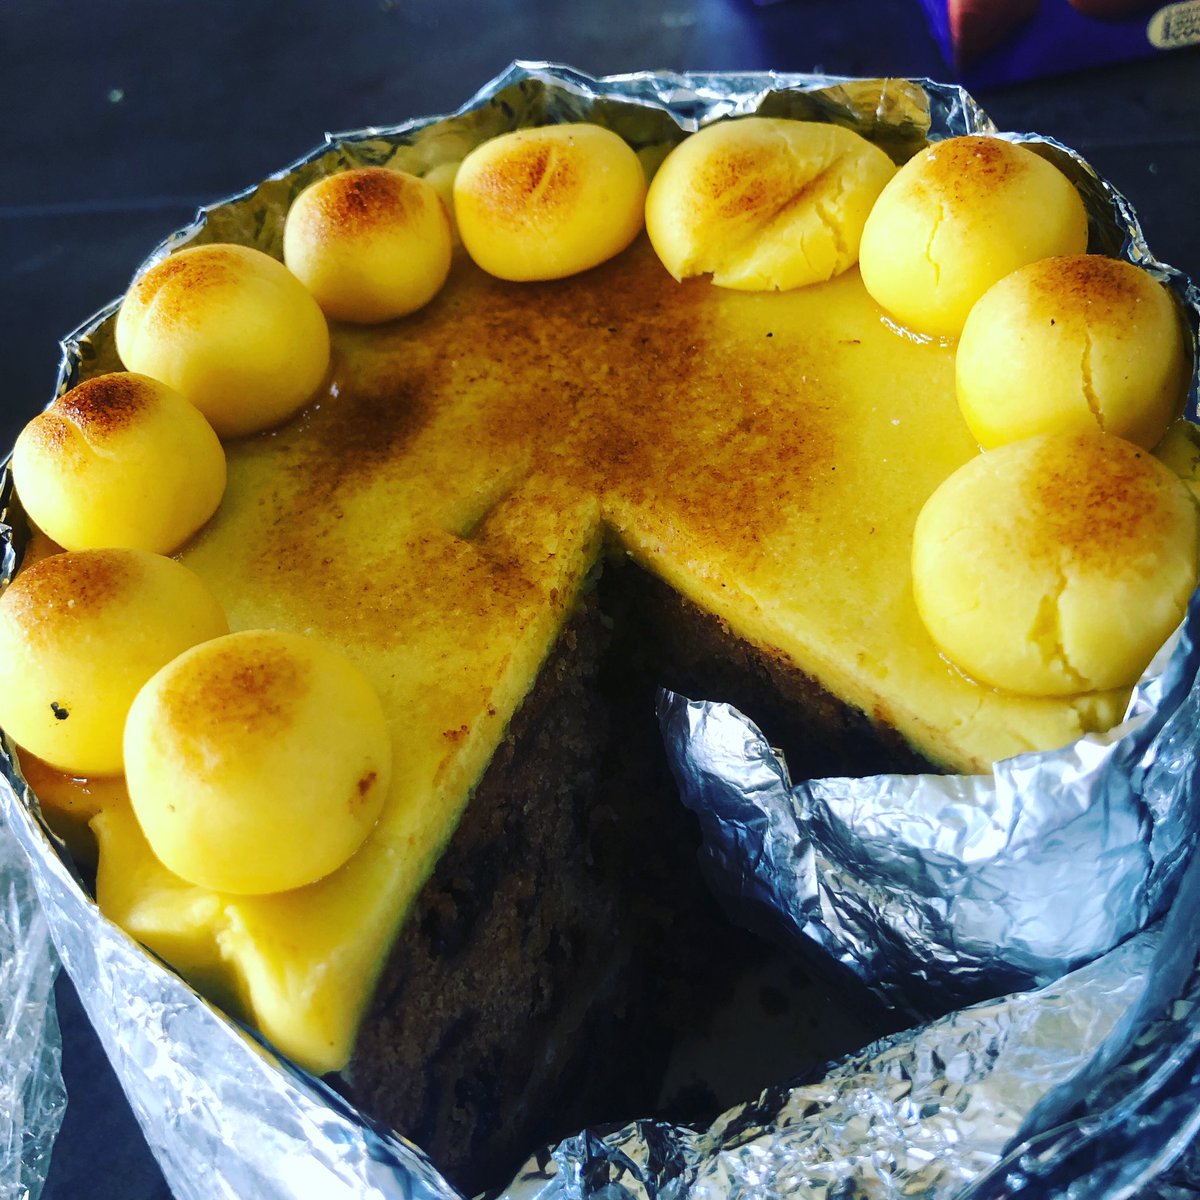 Gram made me Simnel cake for Easter. Was bloody lovely with chocolate and gin! Just as well, as the last crumbs of her Xmas cake (which was rationed), were finished last week. We nibbled them up like little church mice! 🦩🐒🐥🐰🐭
#fruitcake #familystories #foodstories